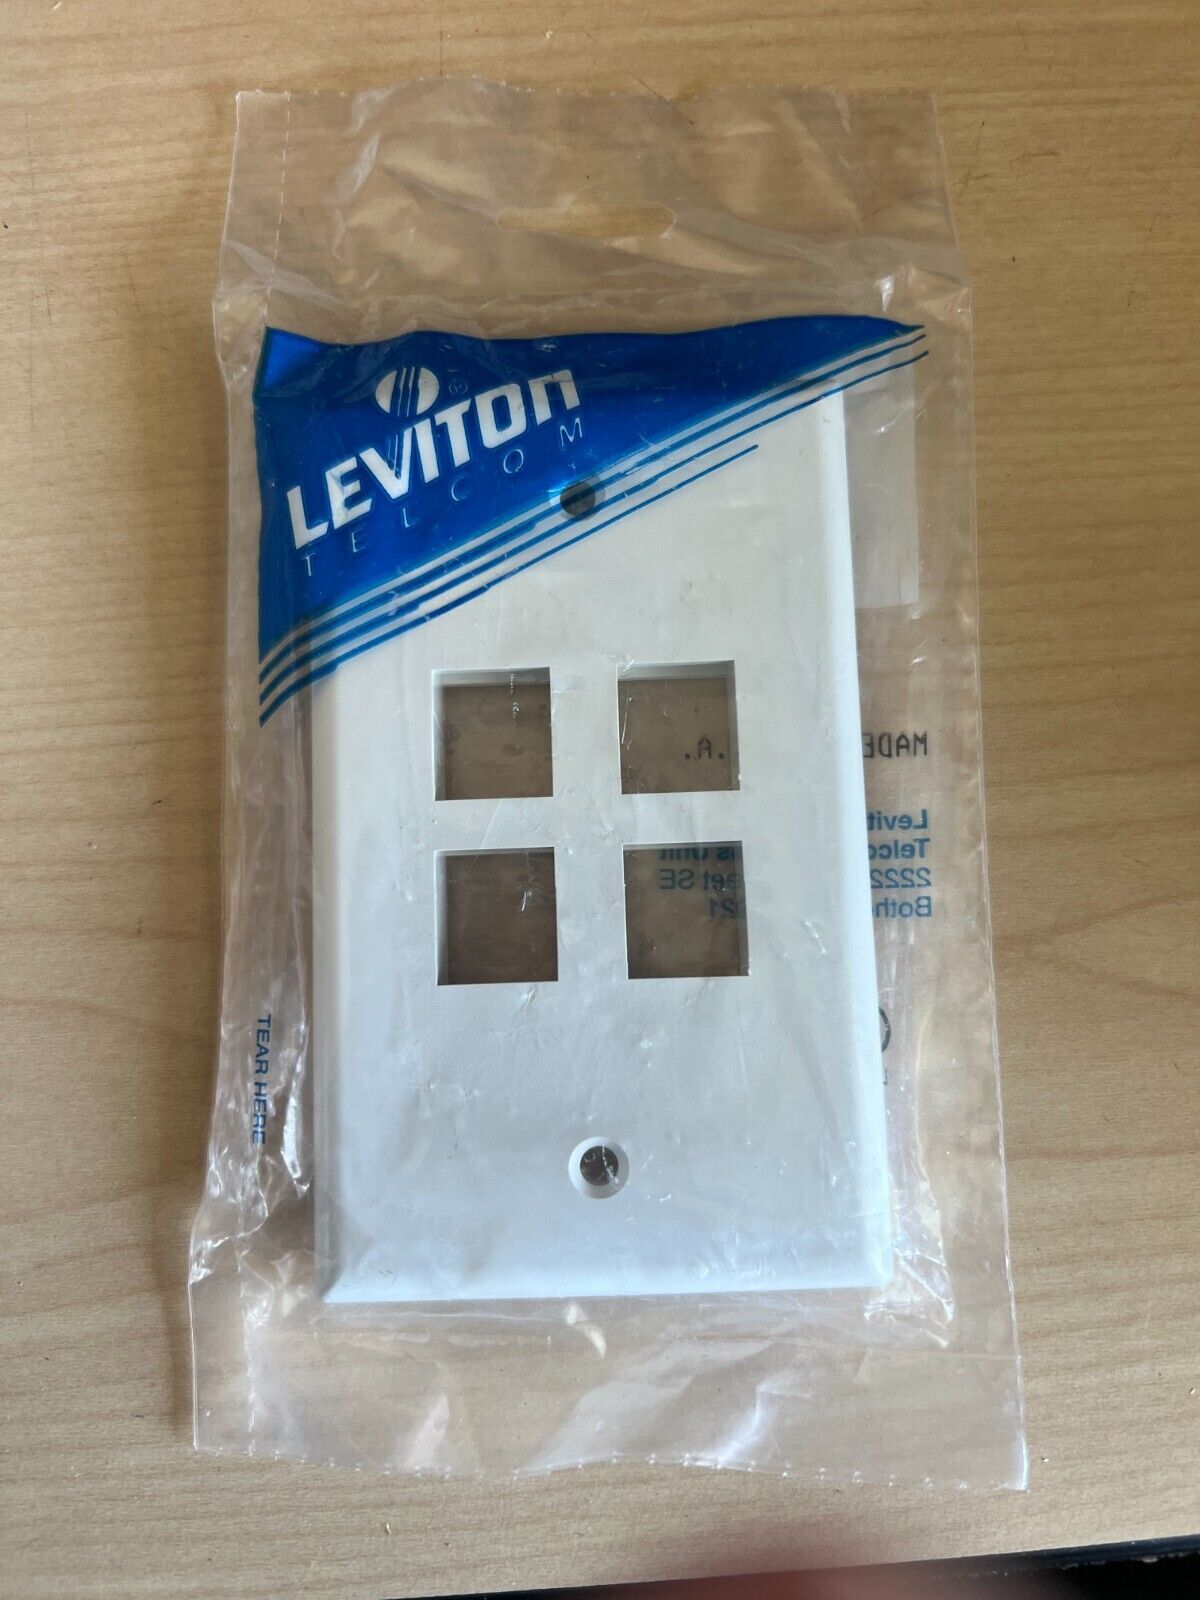 Leviton Cat 41080-4WP Quickport Single-Gang Wall-plate, 4-Port, White Face-plate